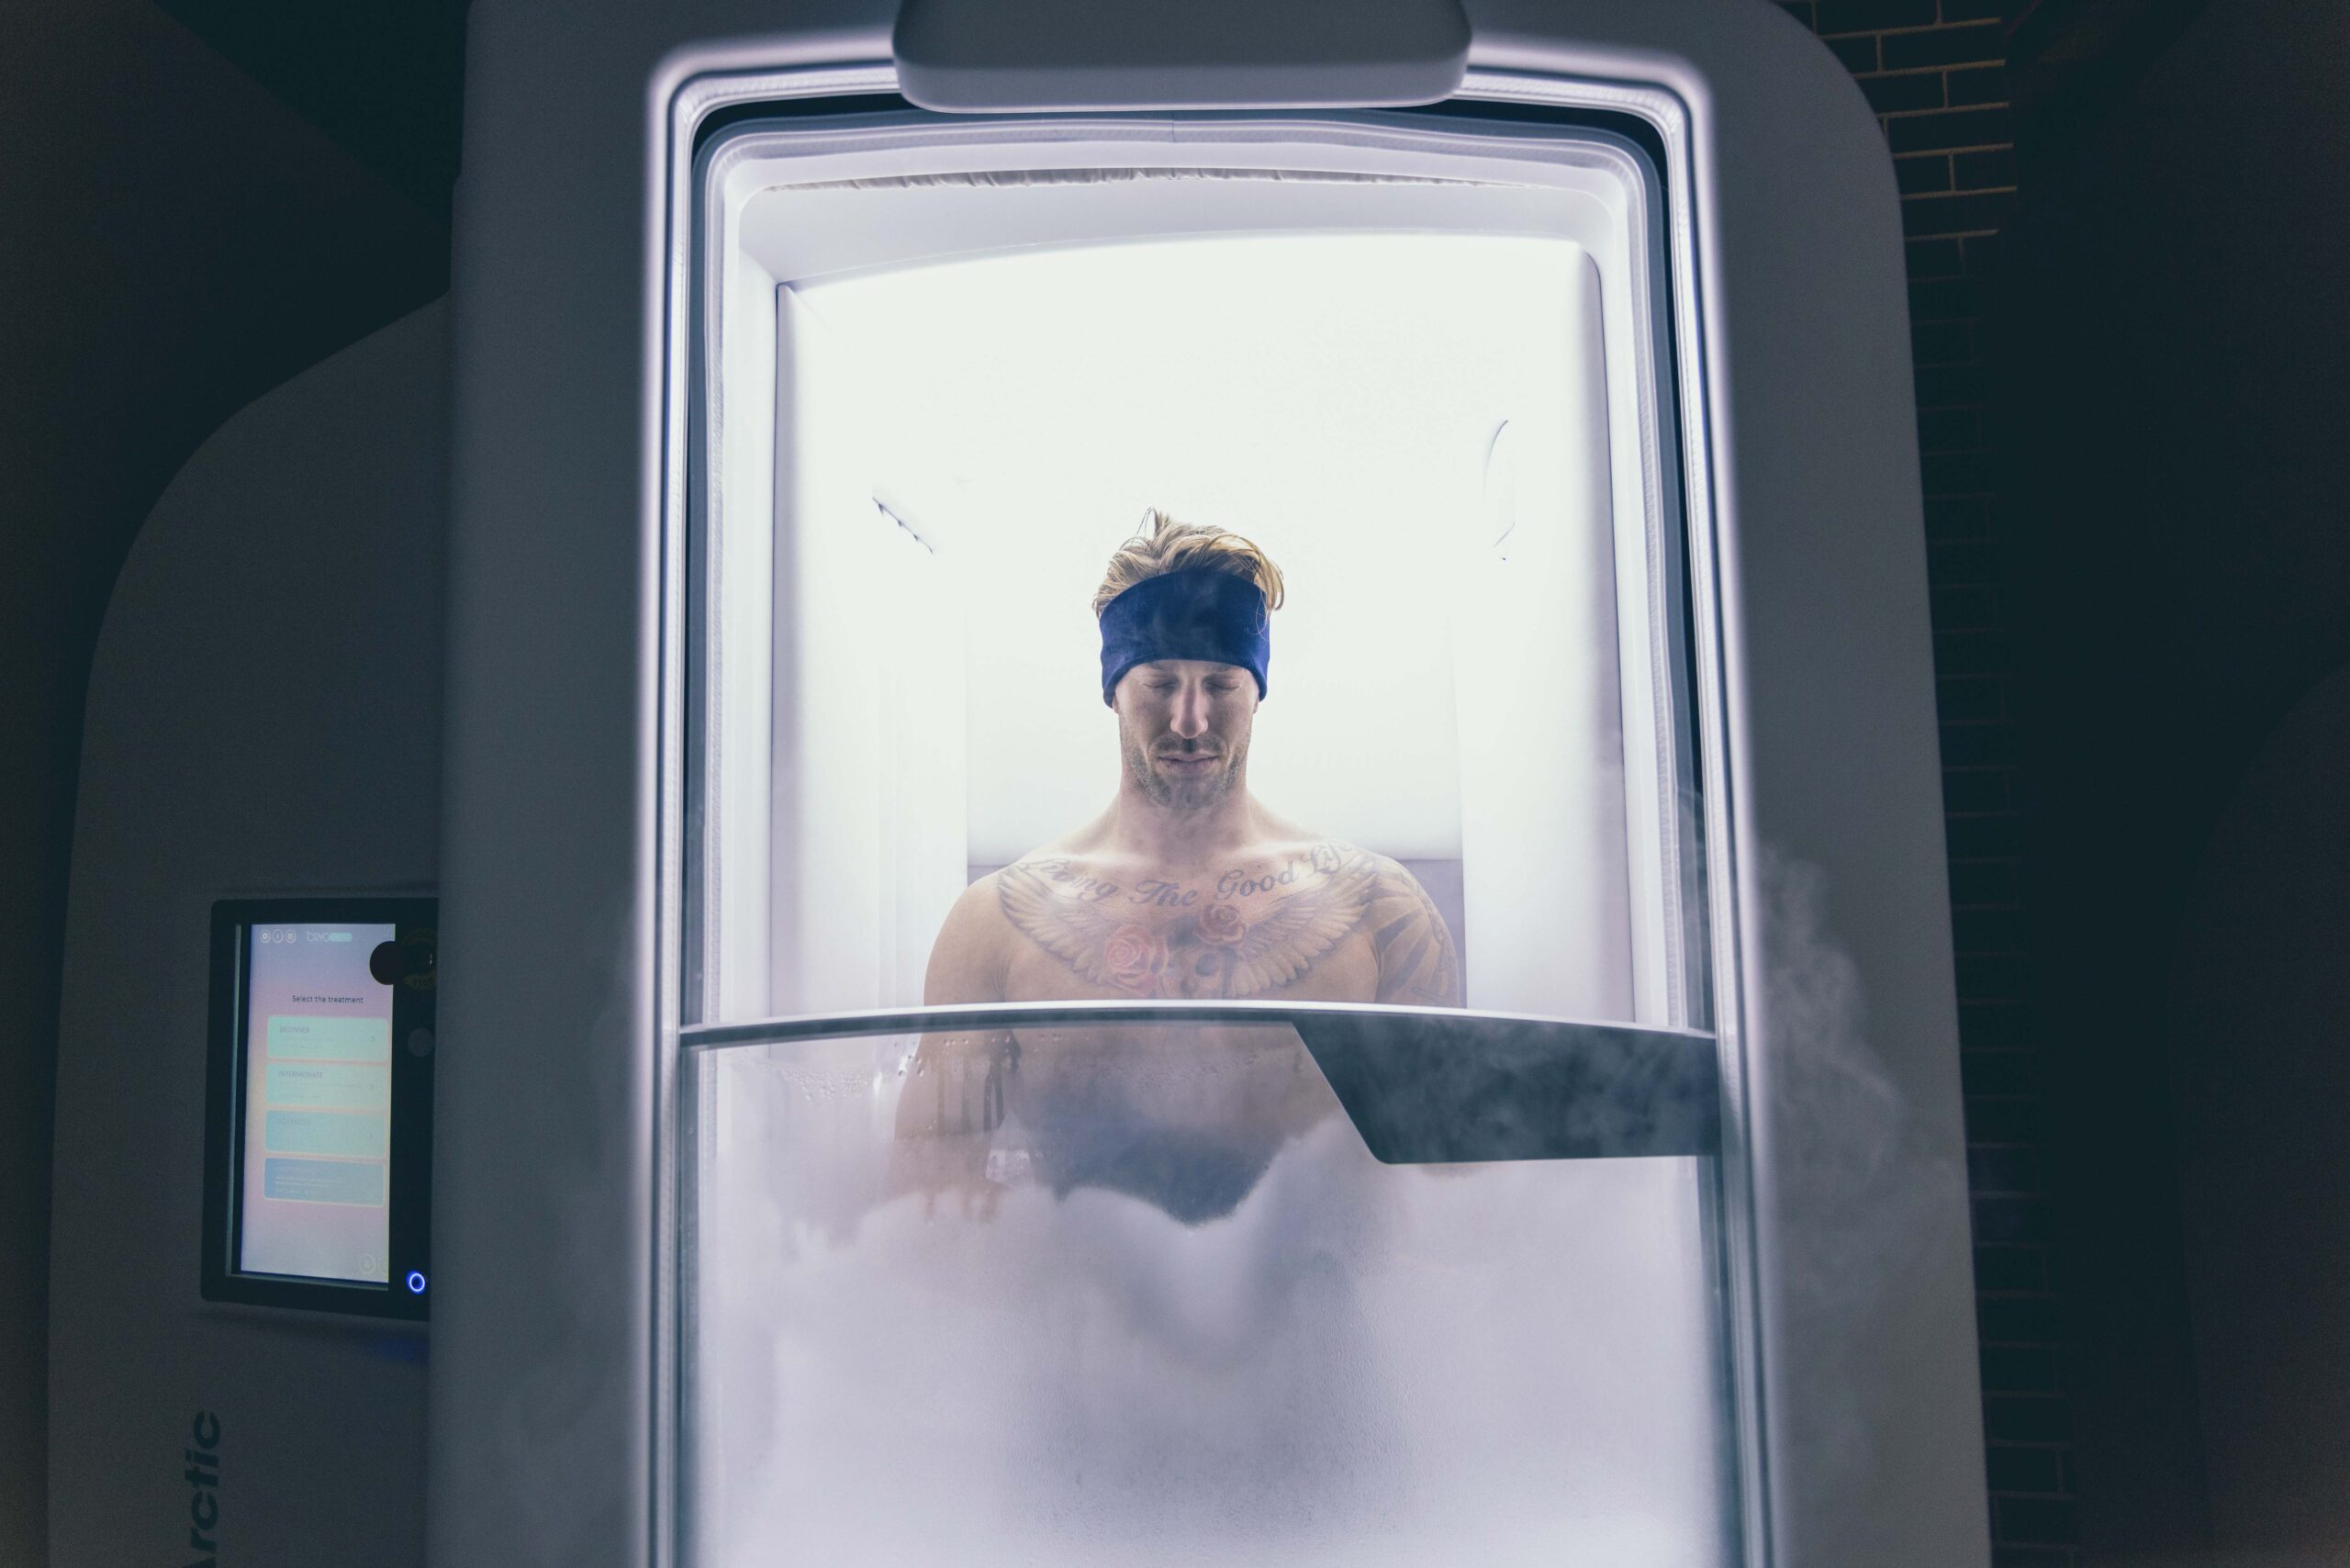 What Cryotherapy Benefits Should People Know About?